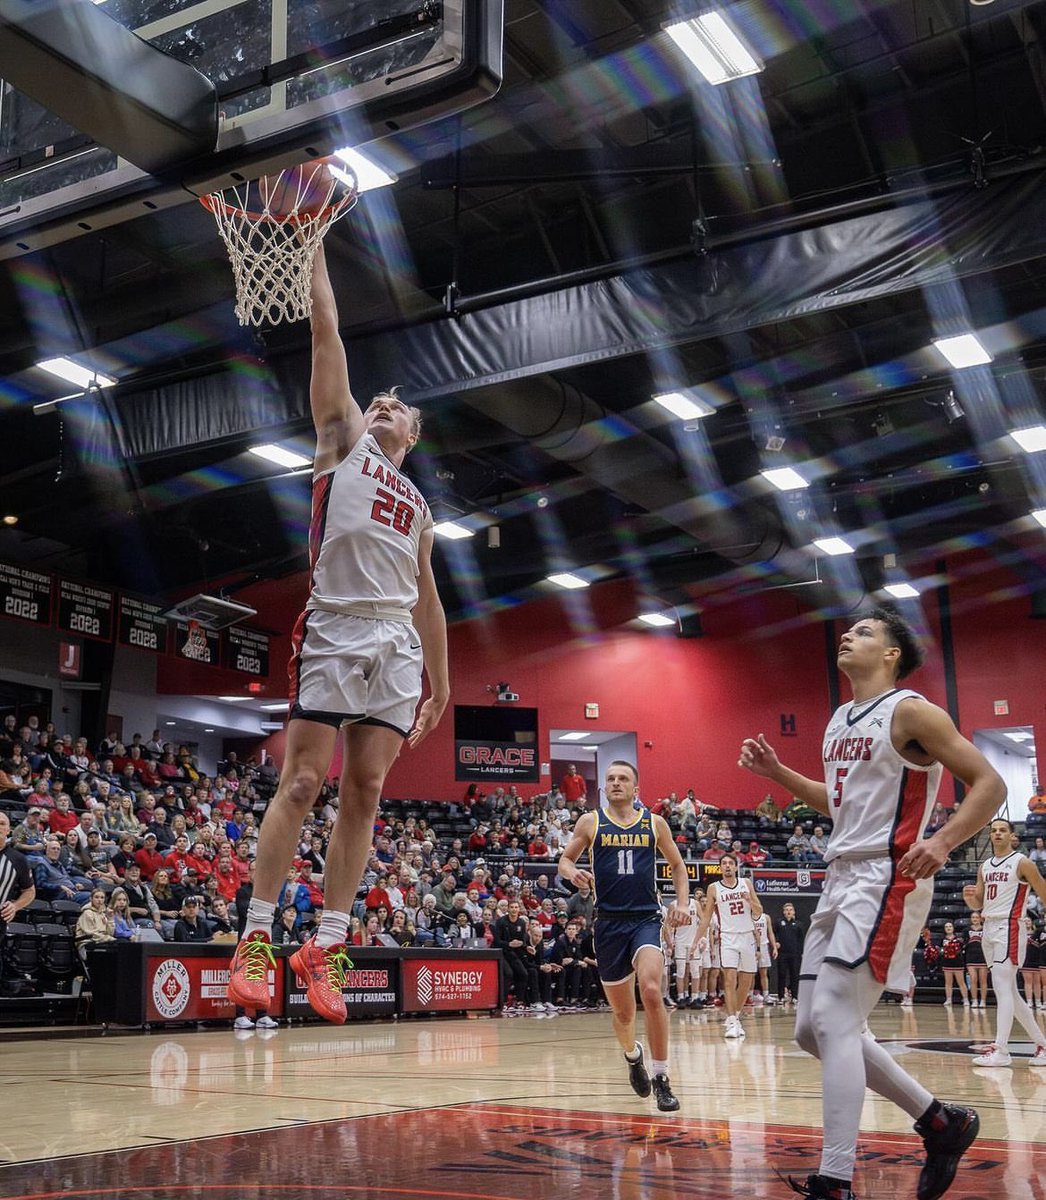 “It was the best decision of my life to come here,” Wadding said, his slice of the net tucked behind his right ear. “Close to home, love the coaches, love the teammates. The best stadium in NAIA right now is right here in Winona Lake. Yeah, it’s the best decision of my life.” ❤️